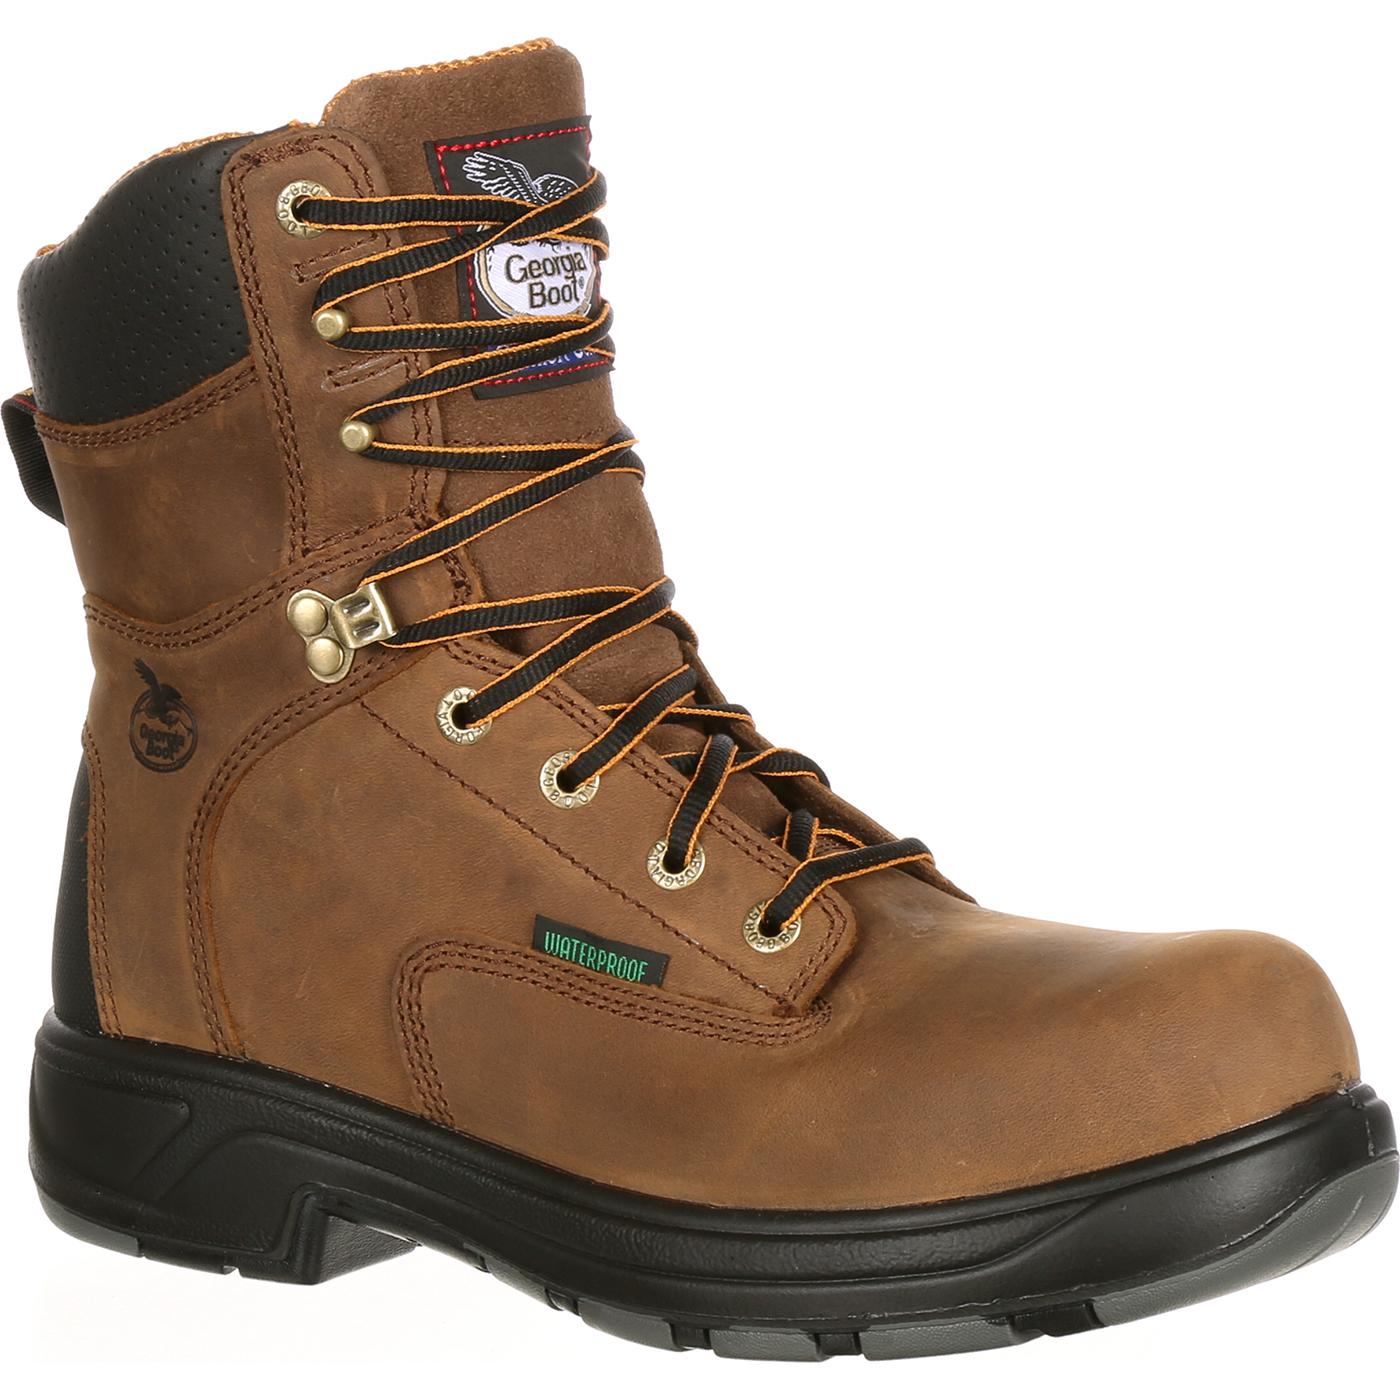 Georgia FLXpoint Waterproof Composite Toe Boot, #G9644